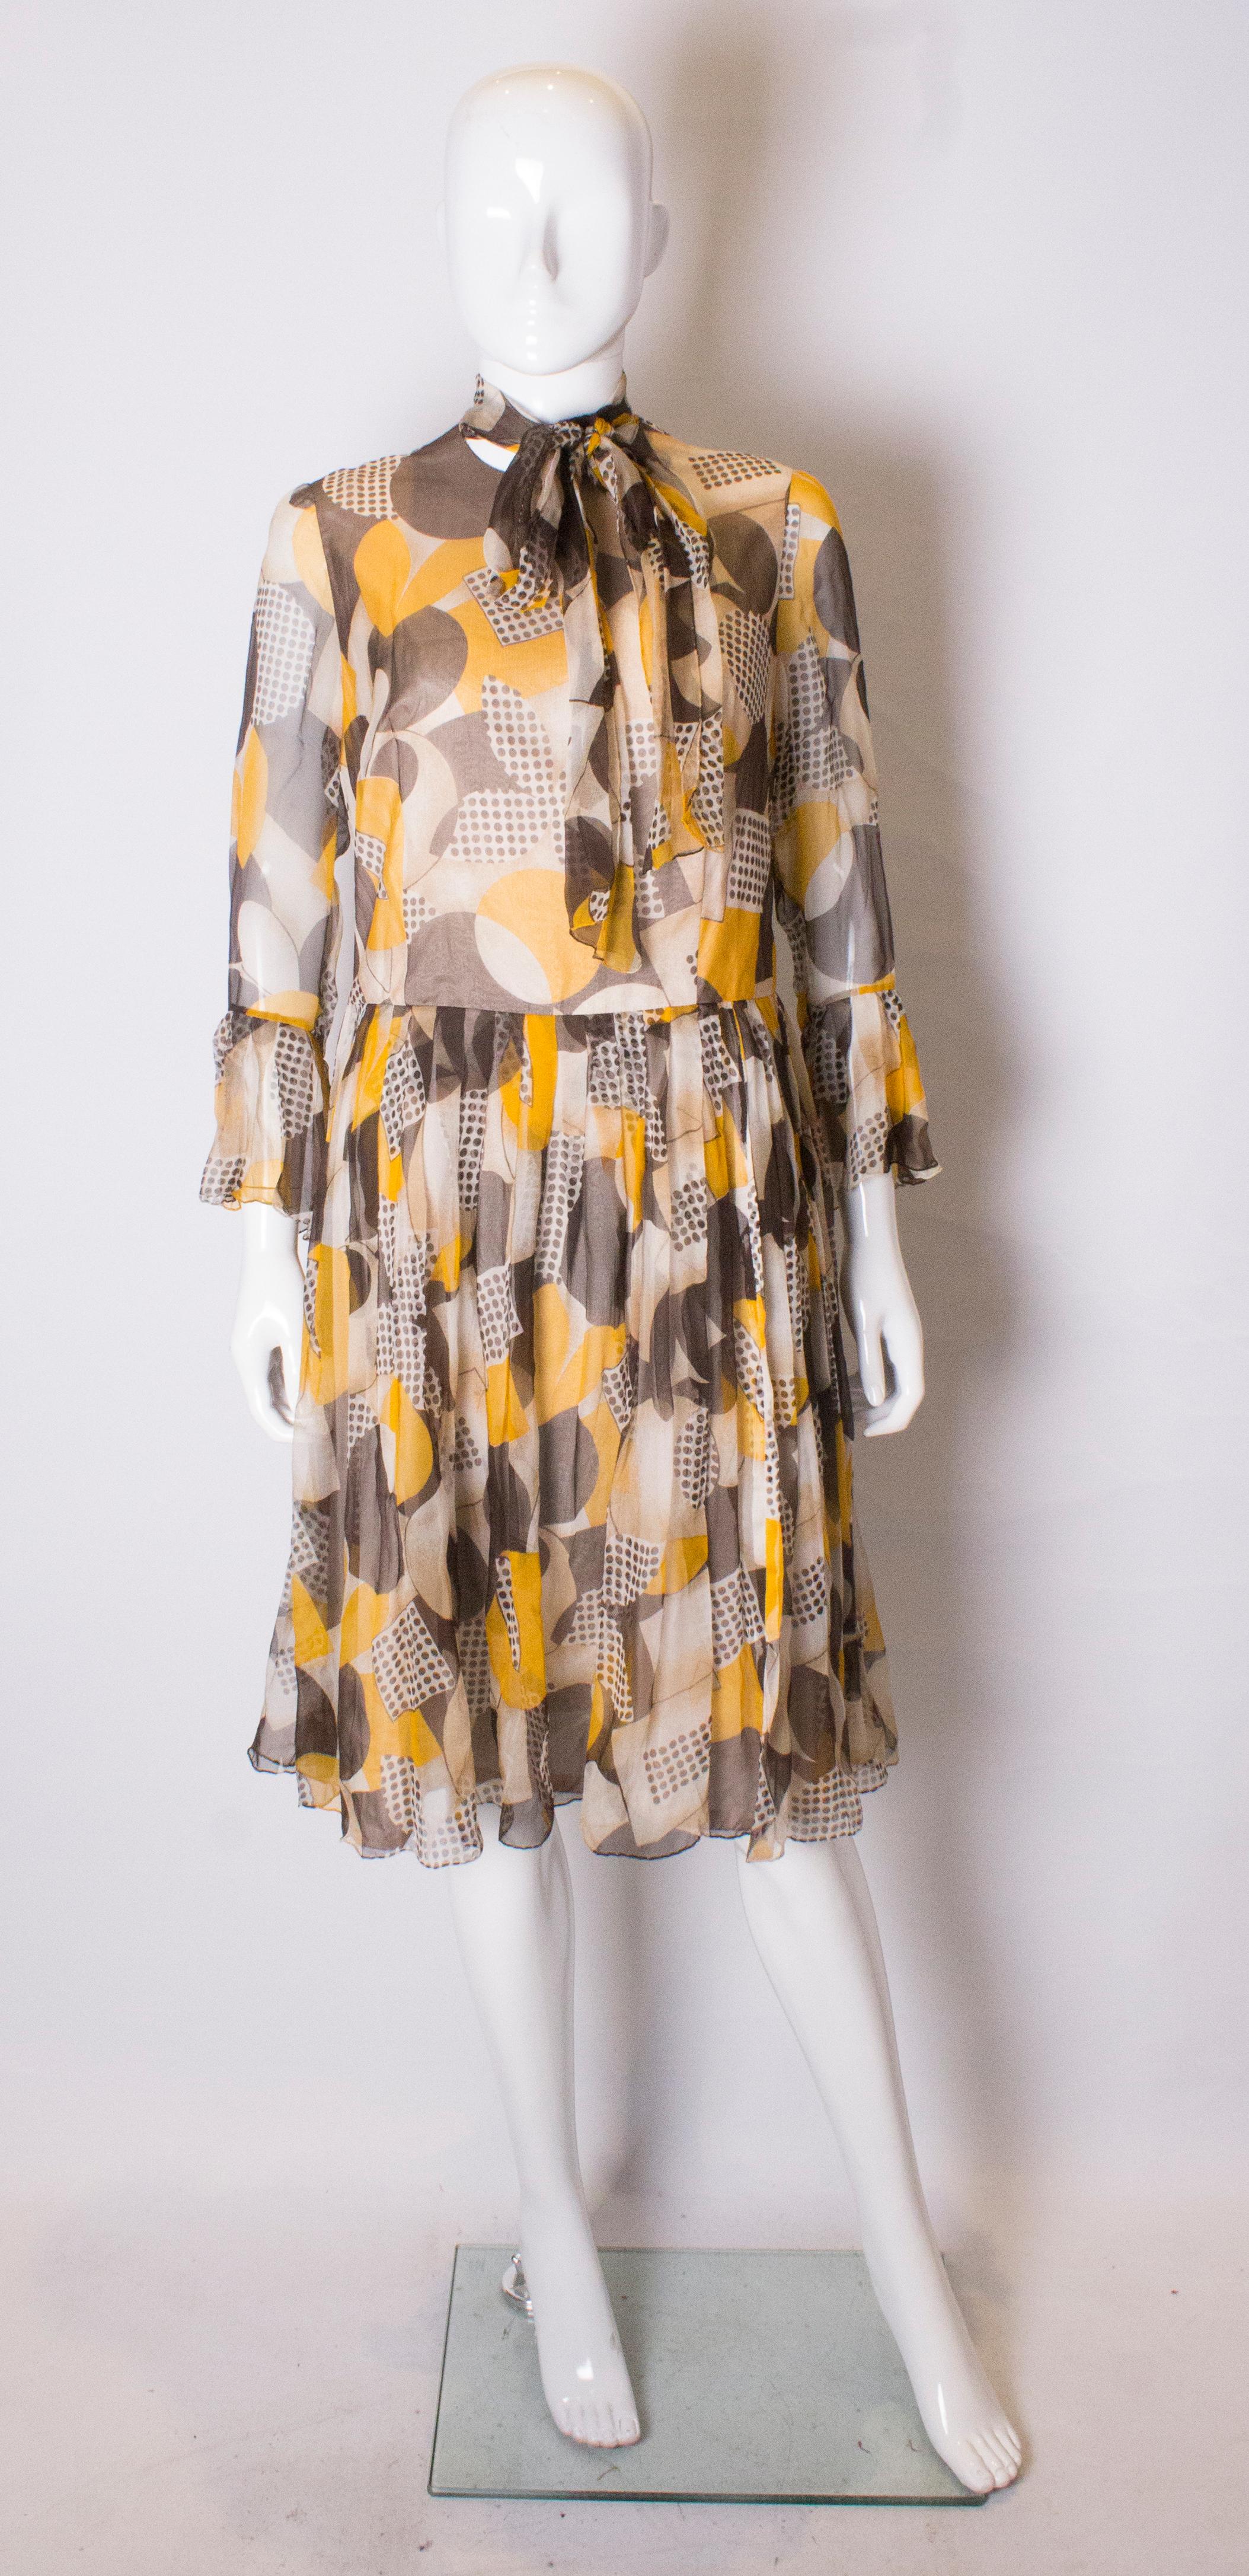 A chic cocktail dress in a groovy print of brown, yellow and cream. The dress has a tie neck , frills at the cuffs and a central back zip . It is fully lined.